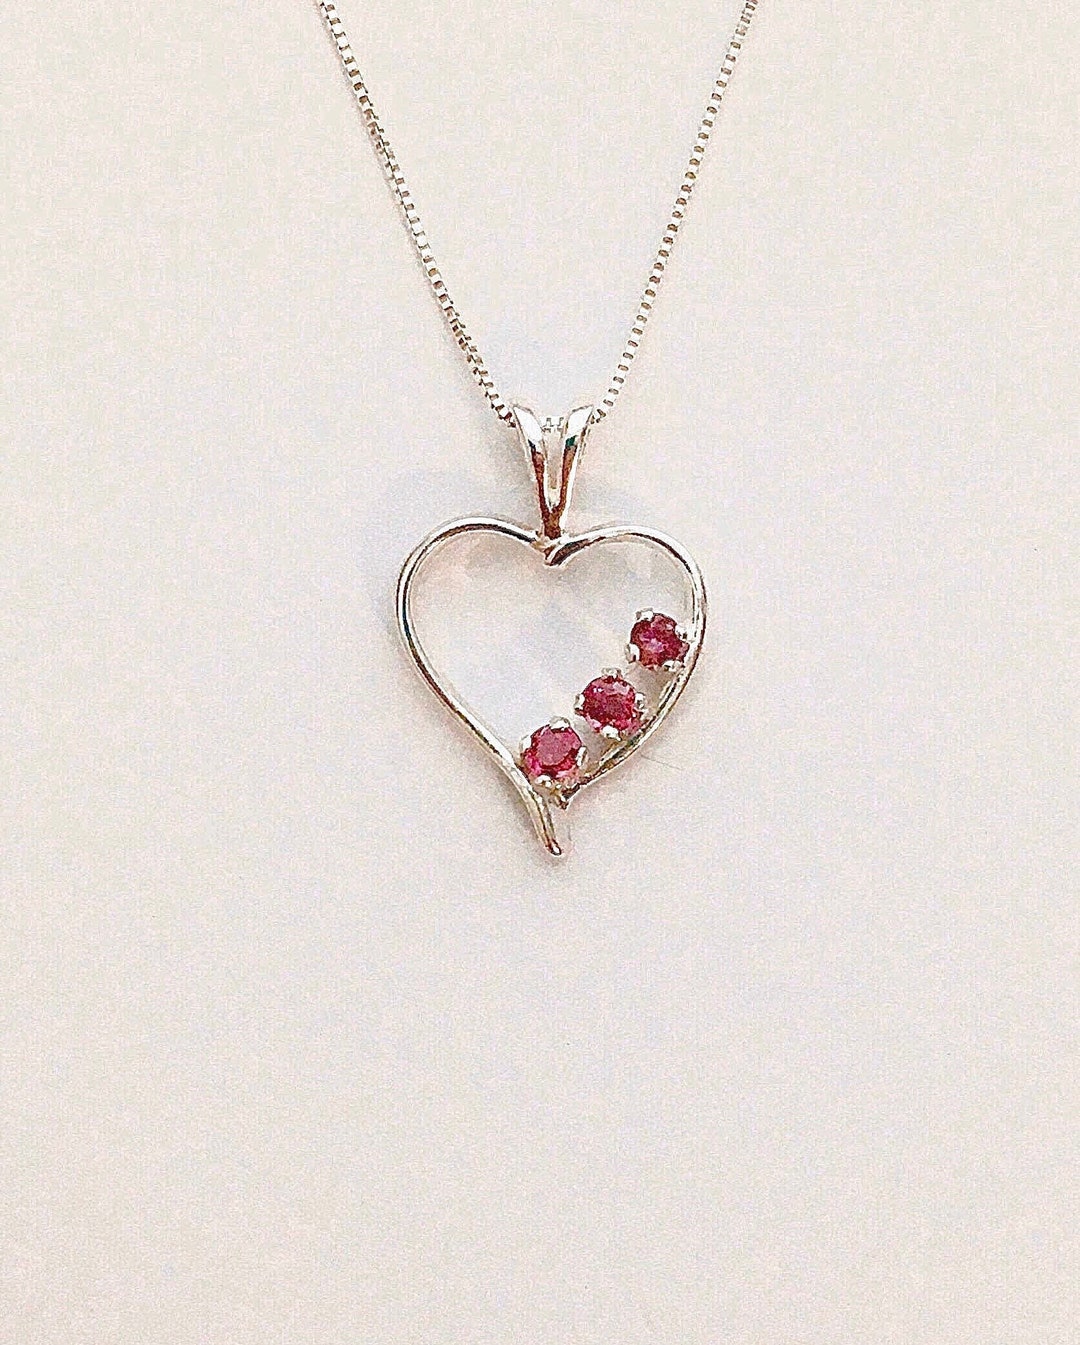 Ruby Heart Necklace, Genuine Ruby Pendant, July Birthstone Necklace ...